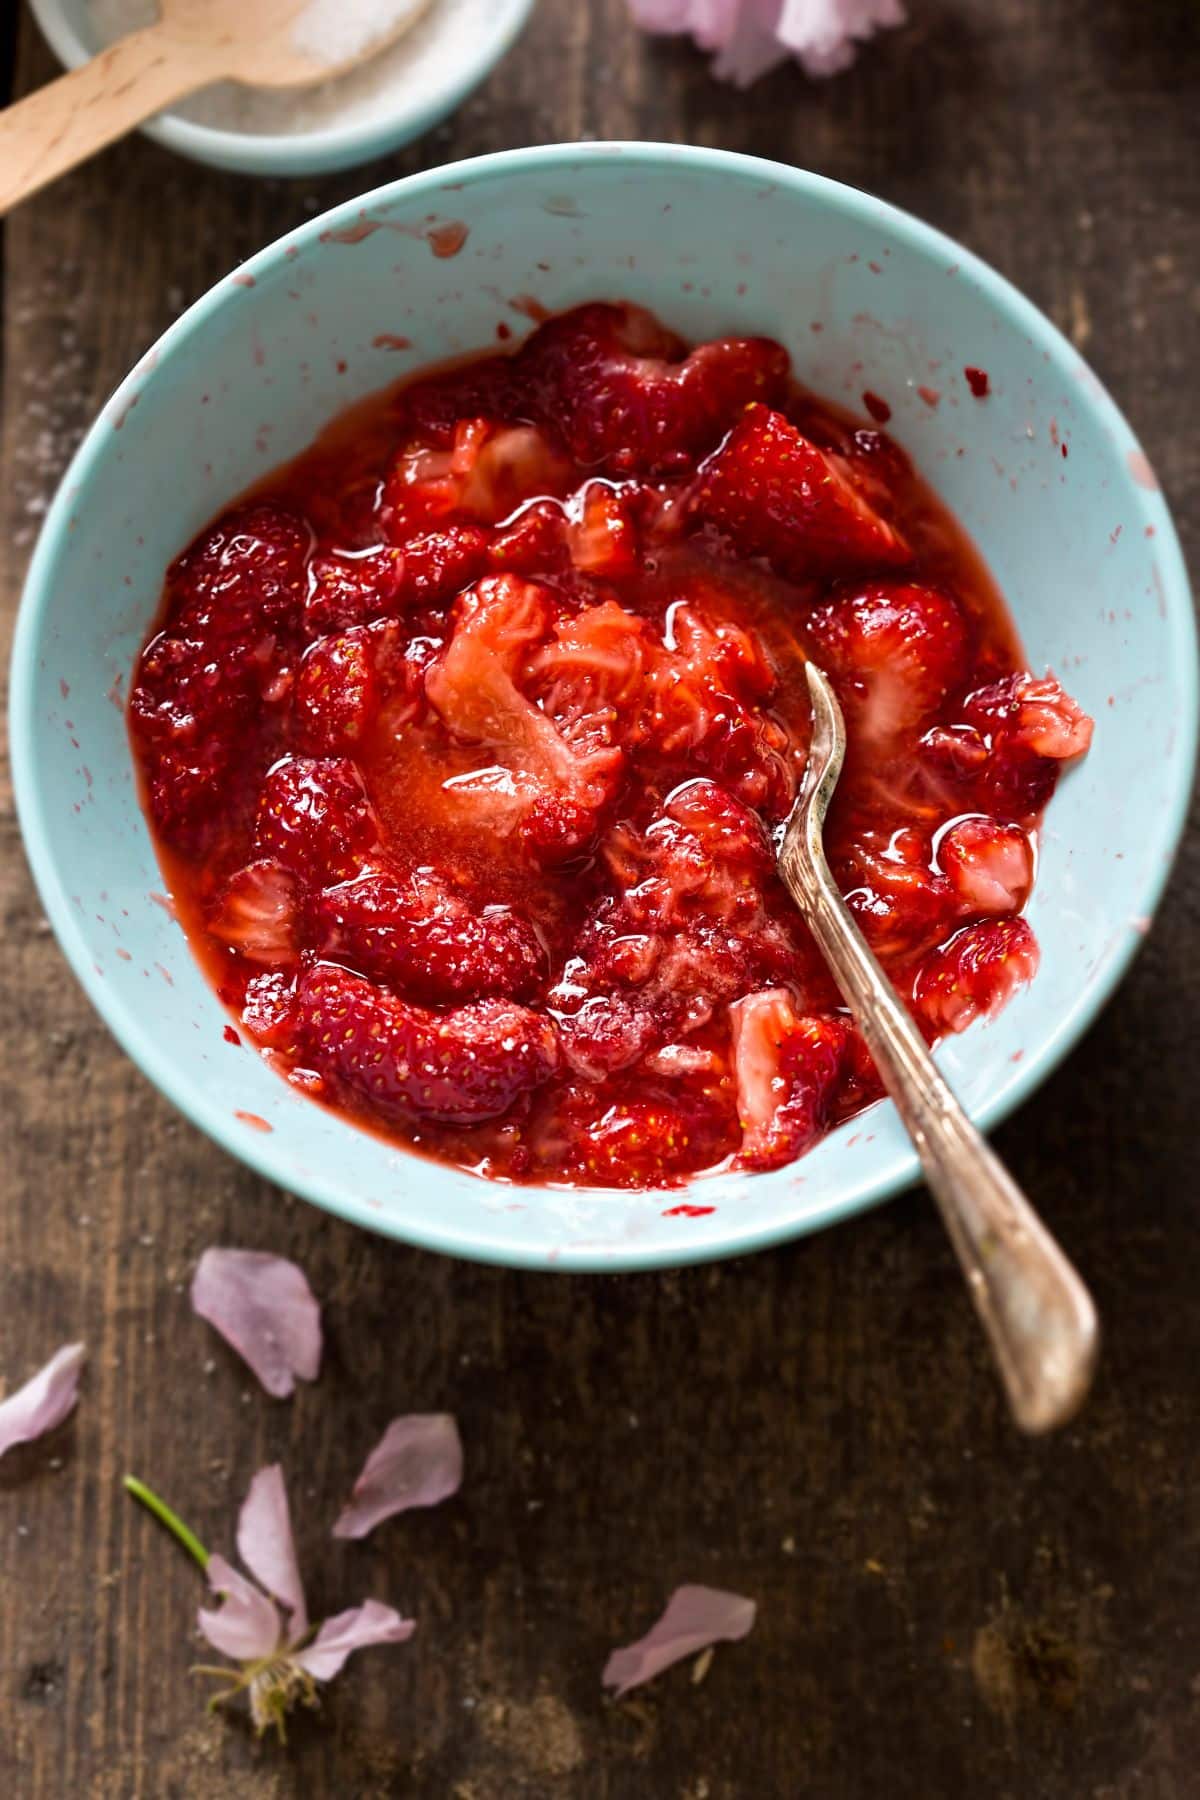 mashed strawberries in bowl.